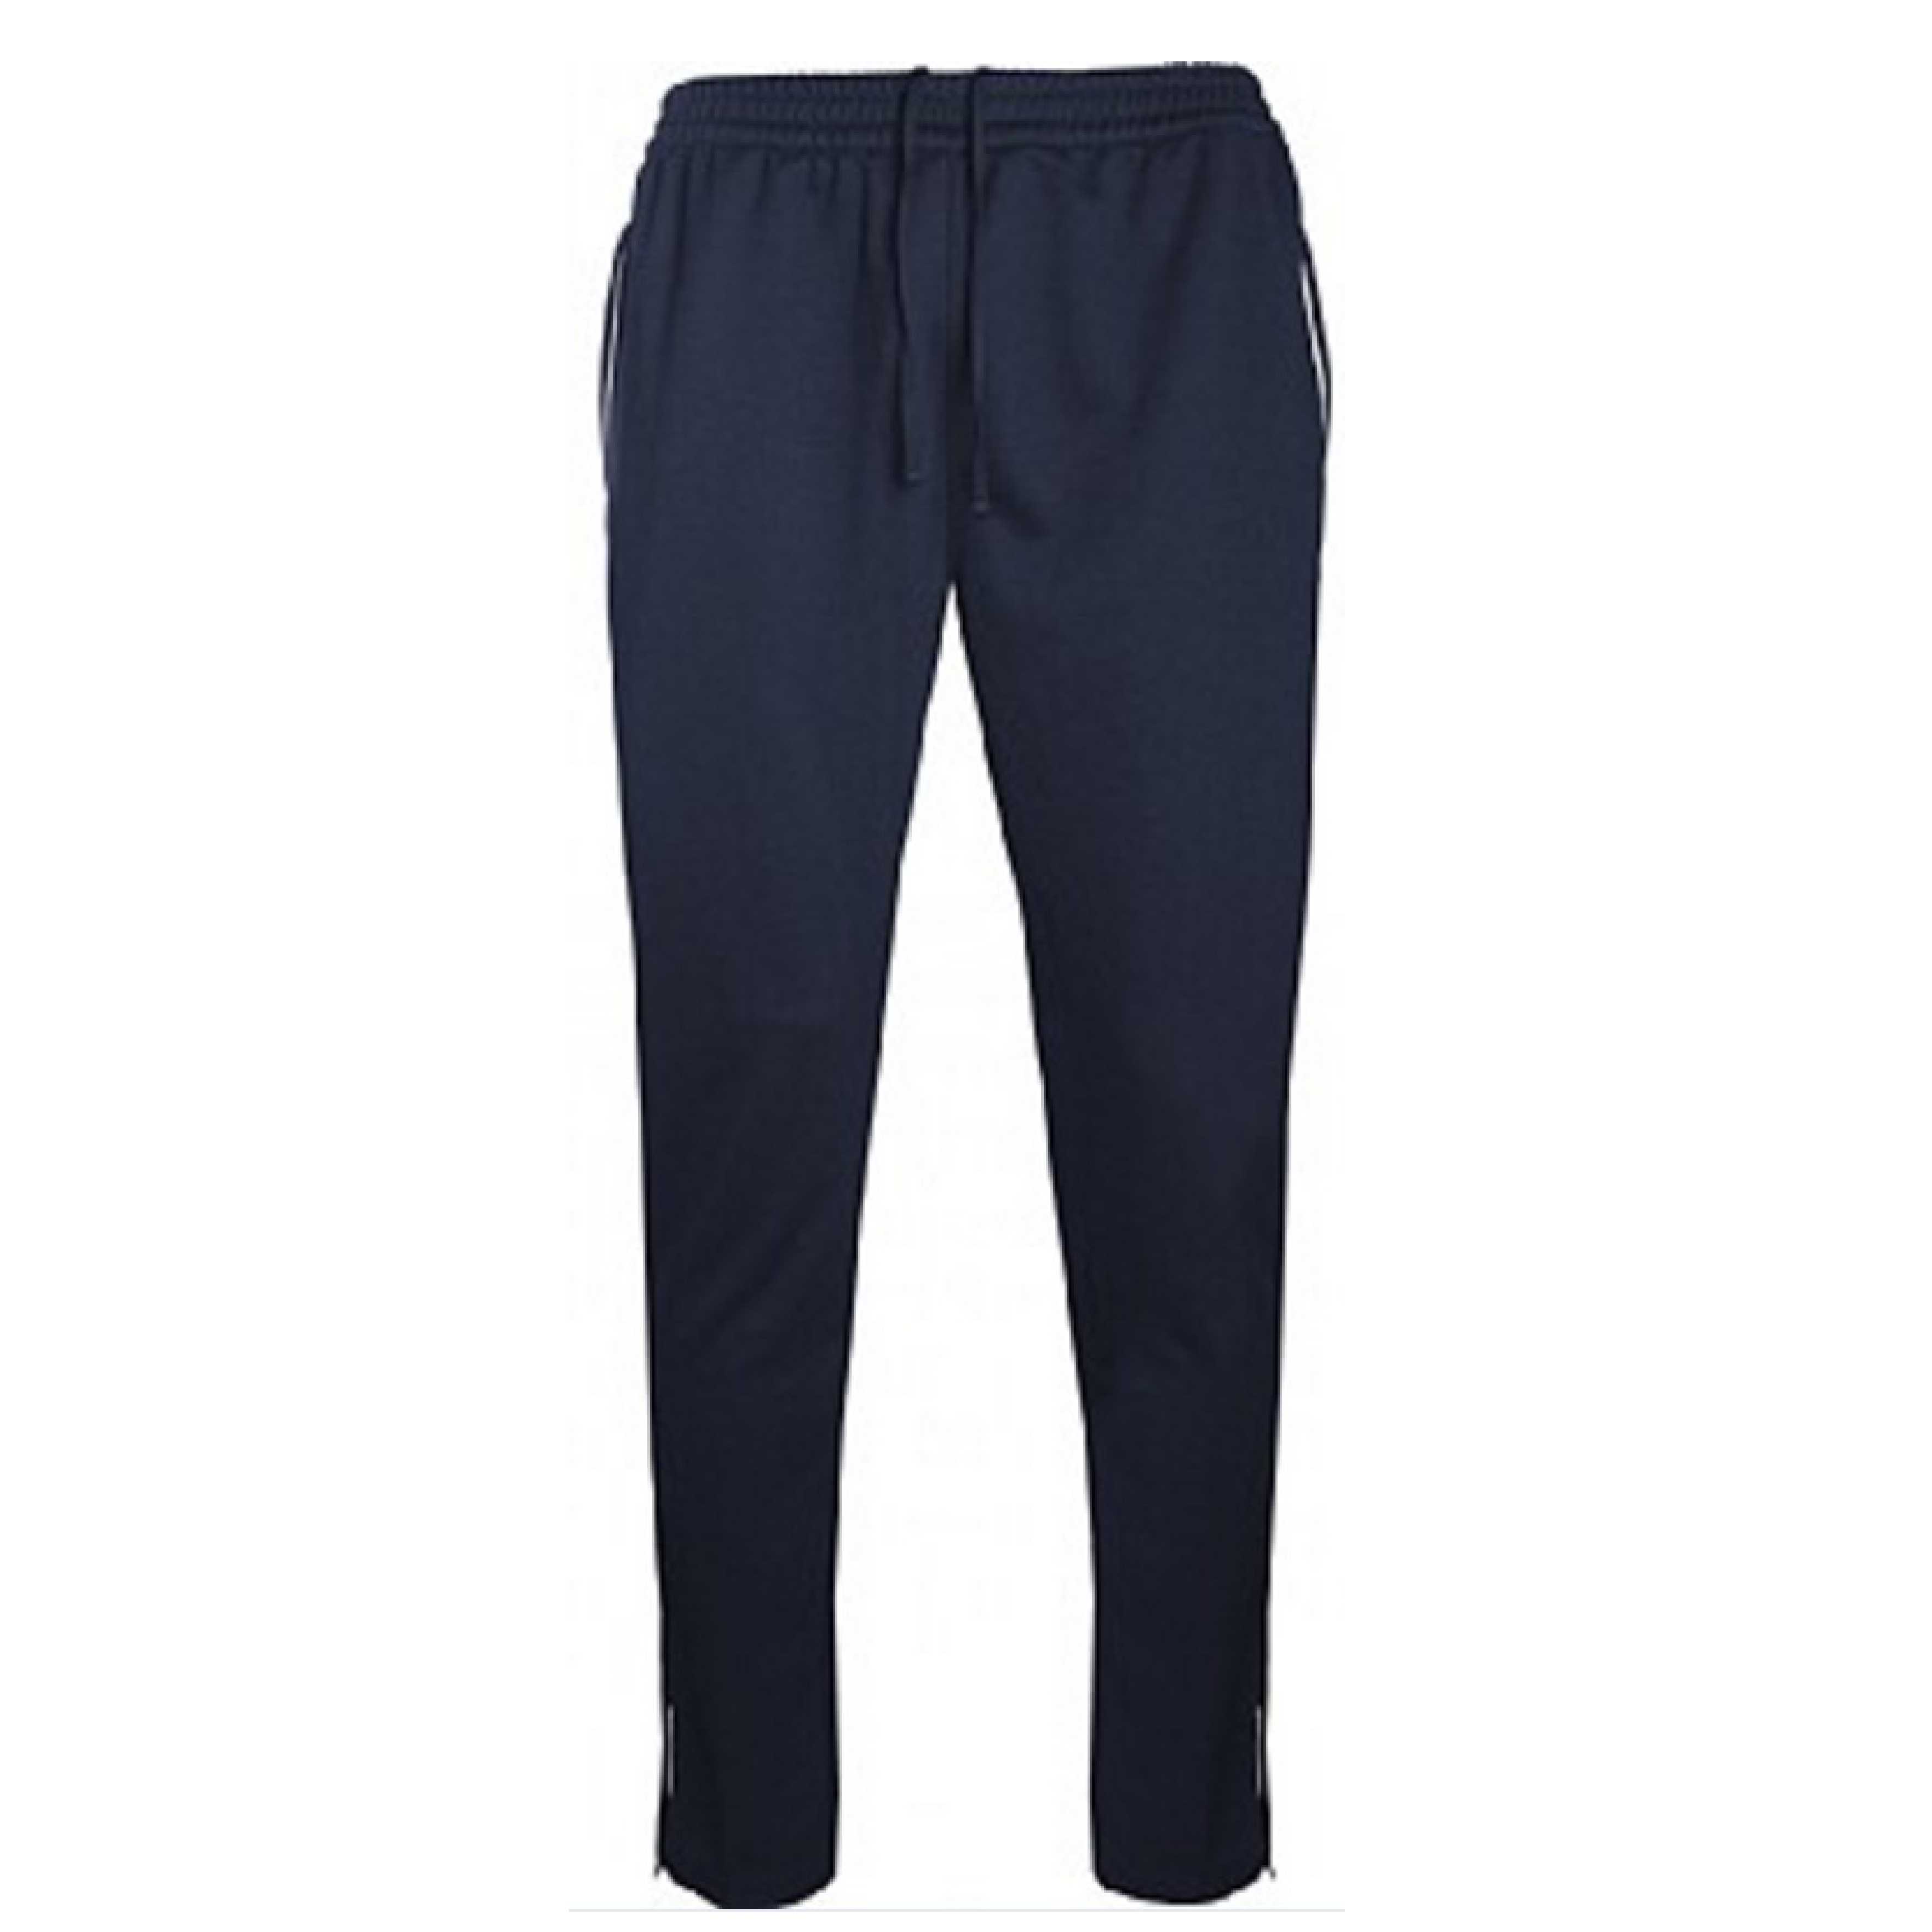 Unisex Navy/Silver Training Pants - Schoolwear Solutions